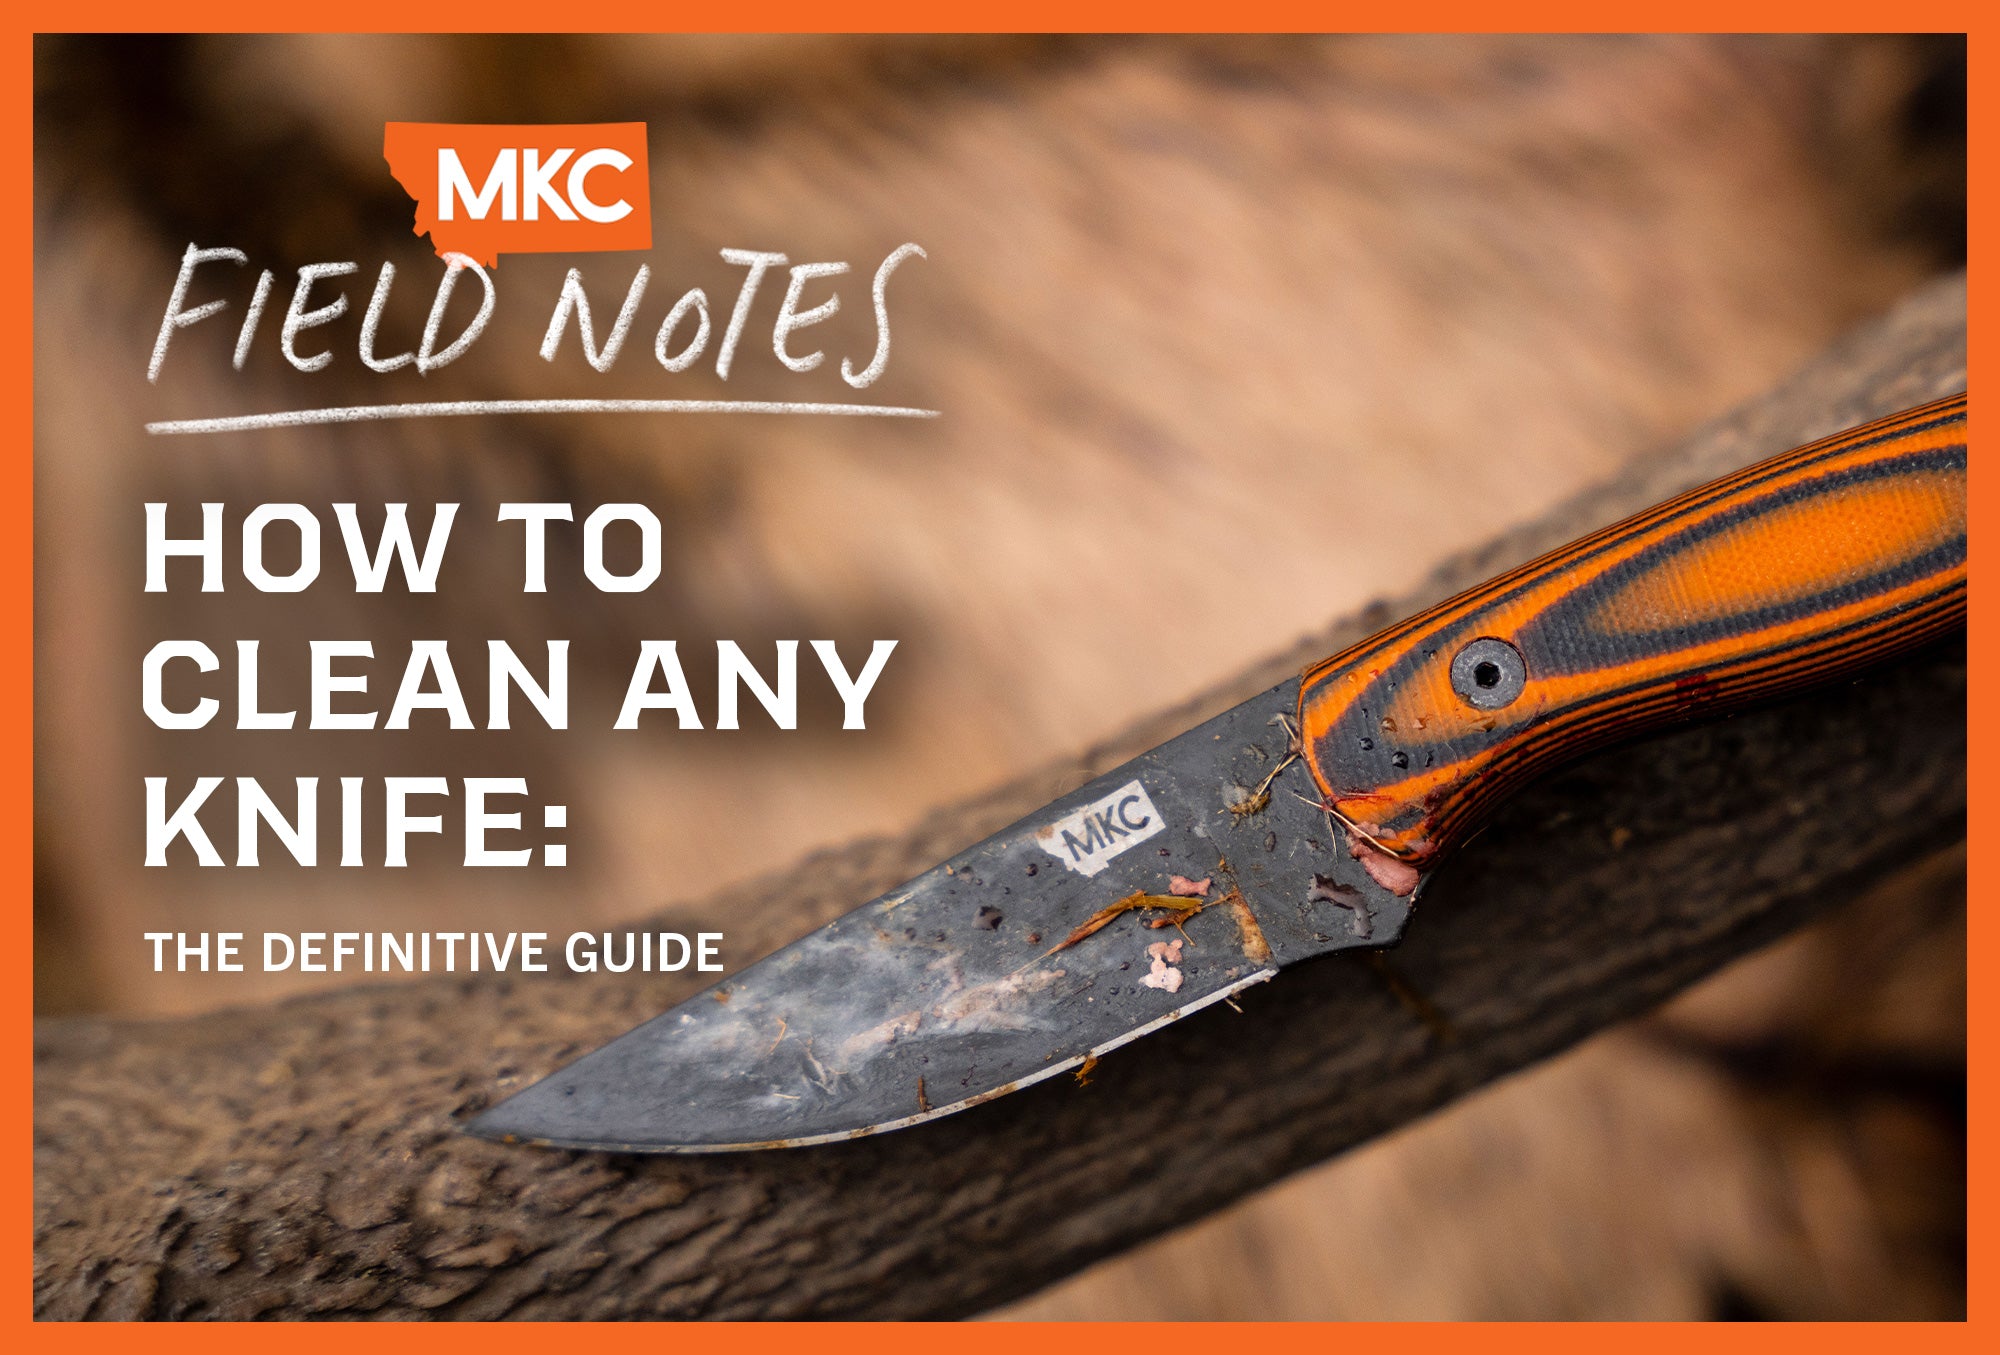 A guide on how to clean a knife shows a dirty blade with an orange handle on a wooden surface. 